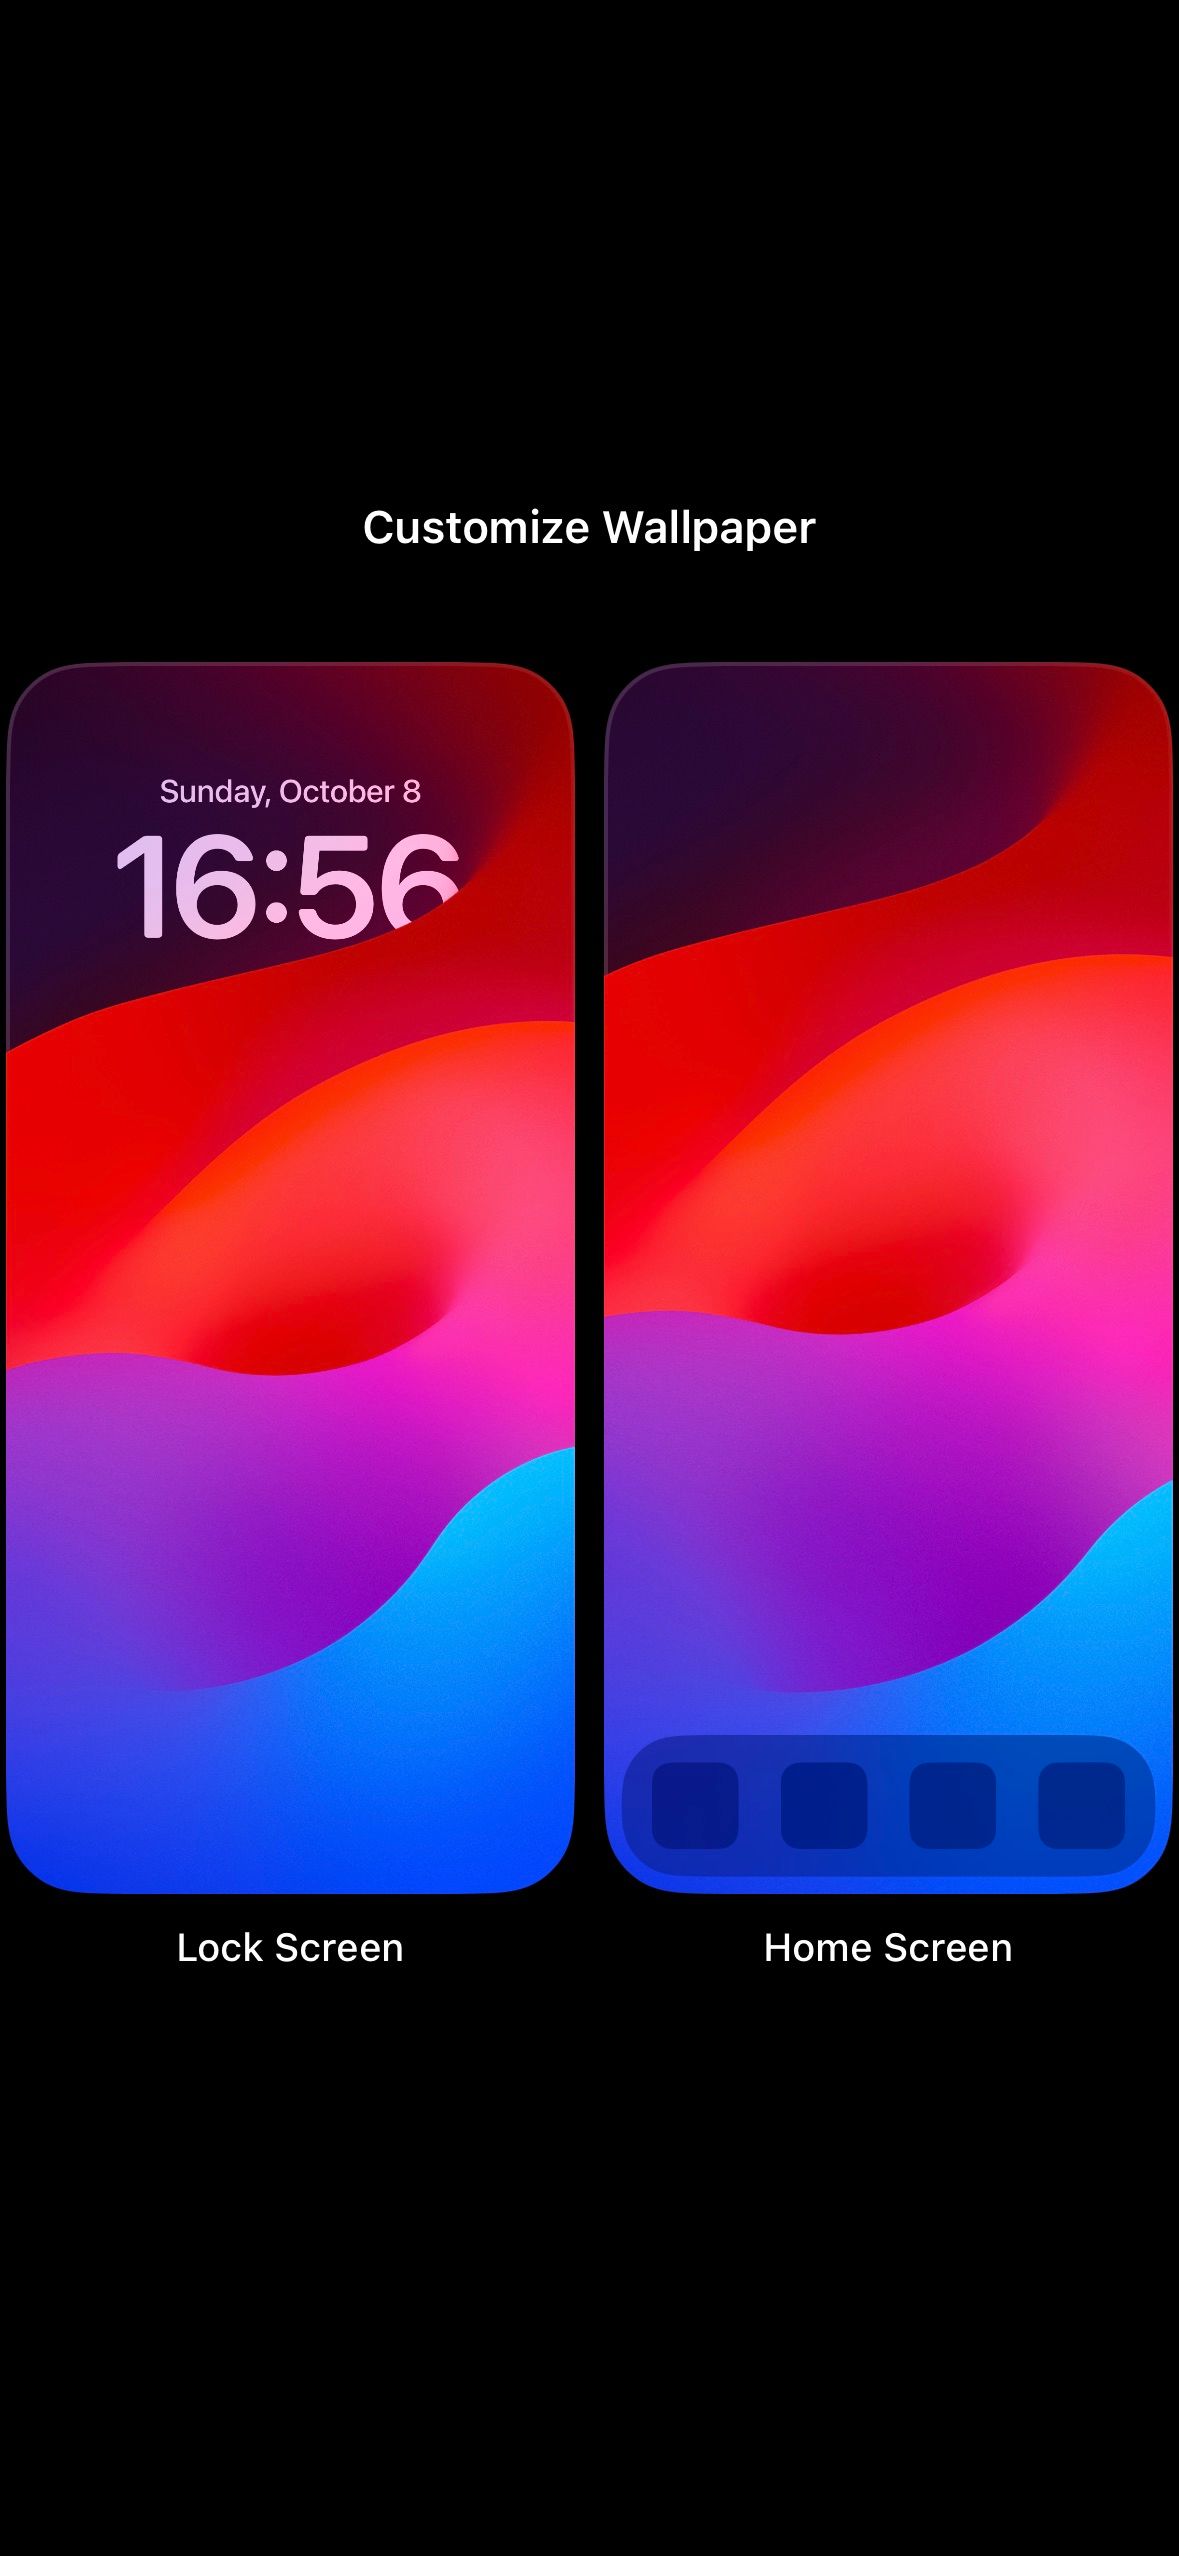 menu to choose between lock screen and home screen on iOS during customization